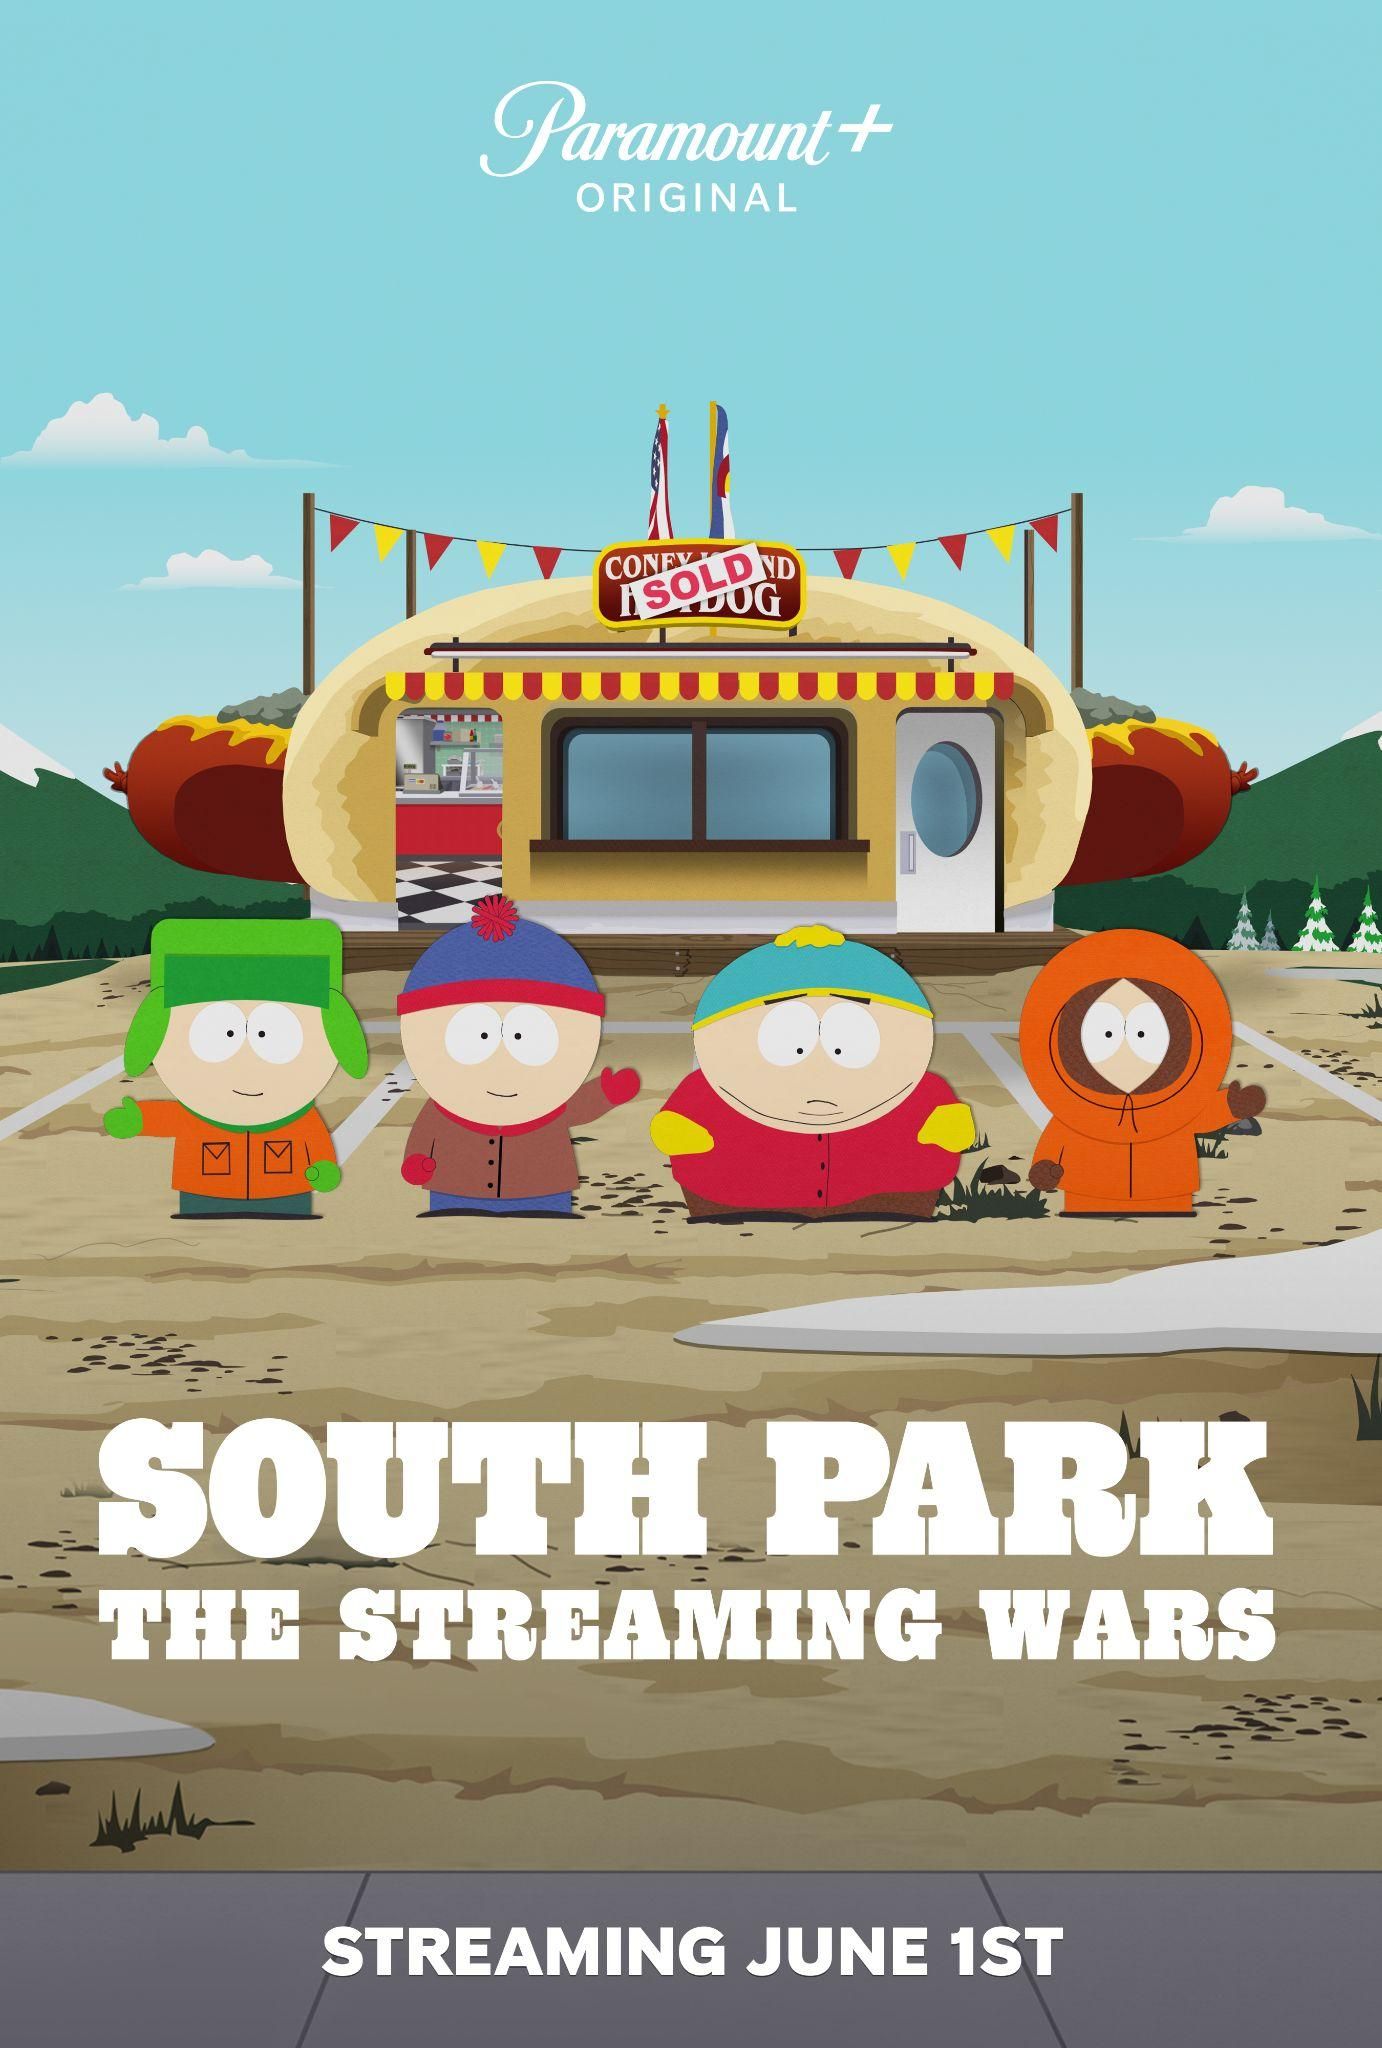 A poster for South Park Streaming Wars TV show premiering June 1 on Paramount+